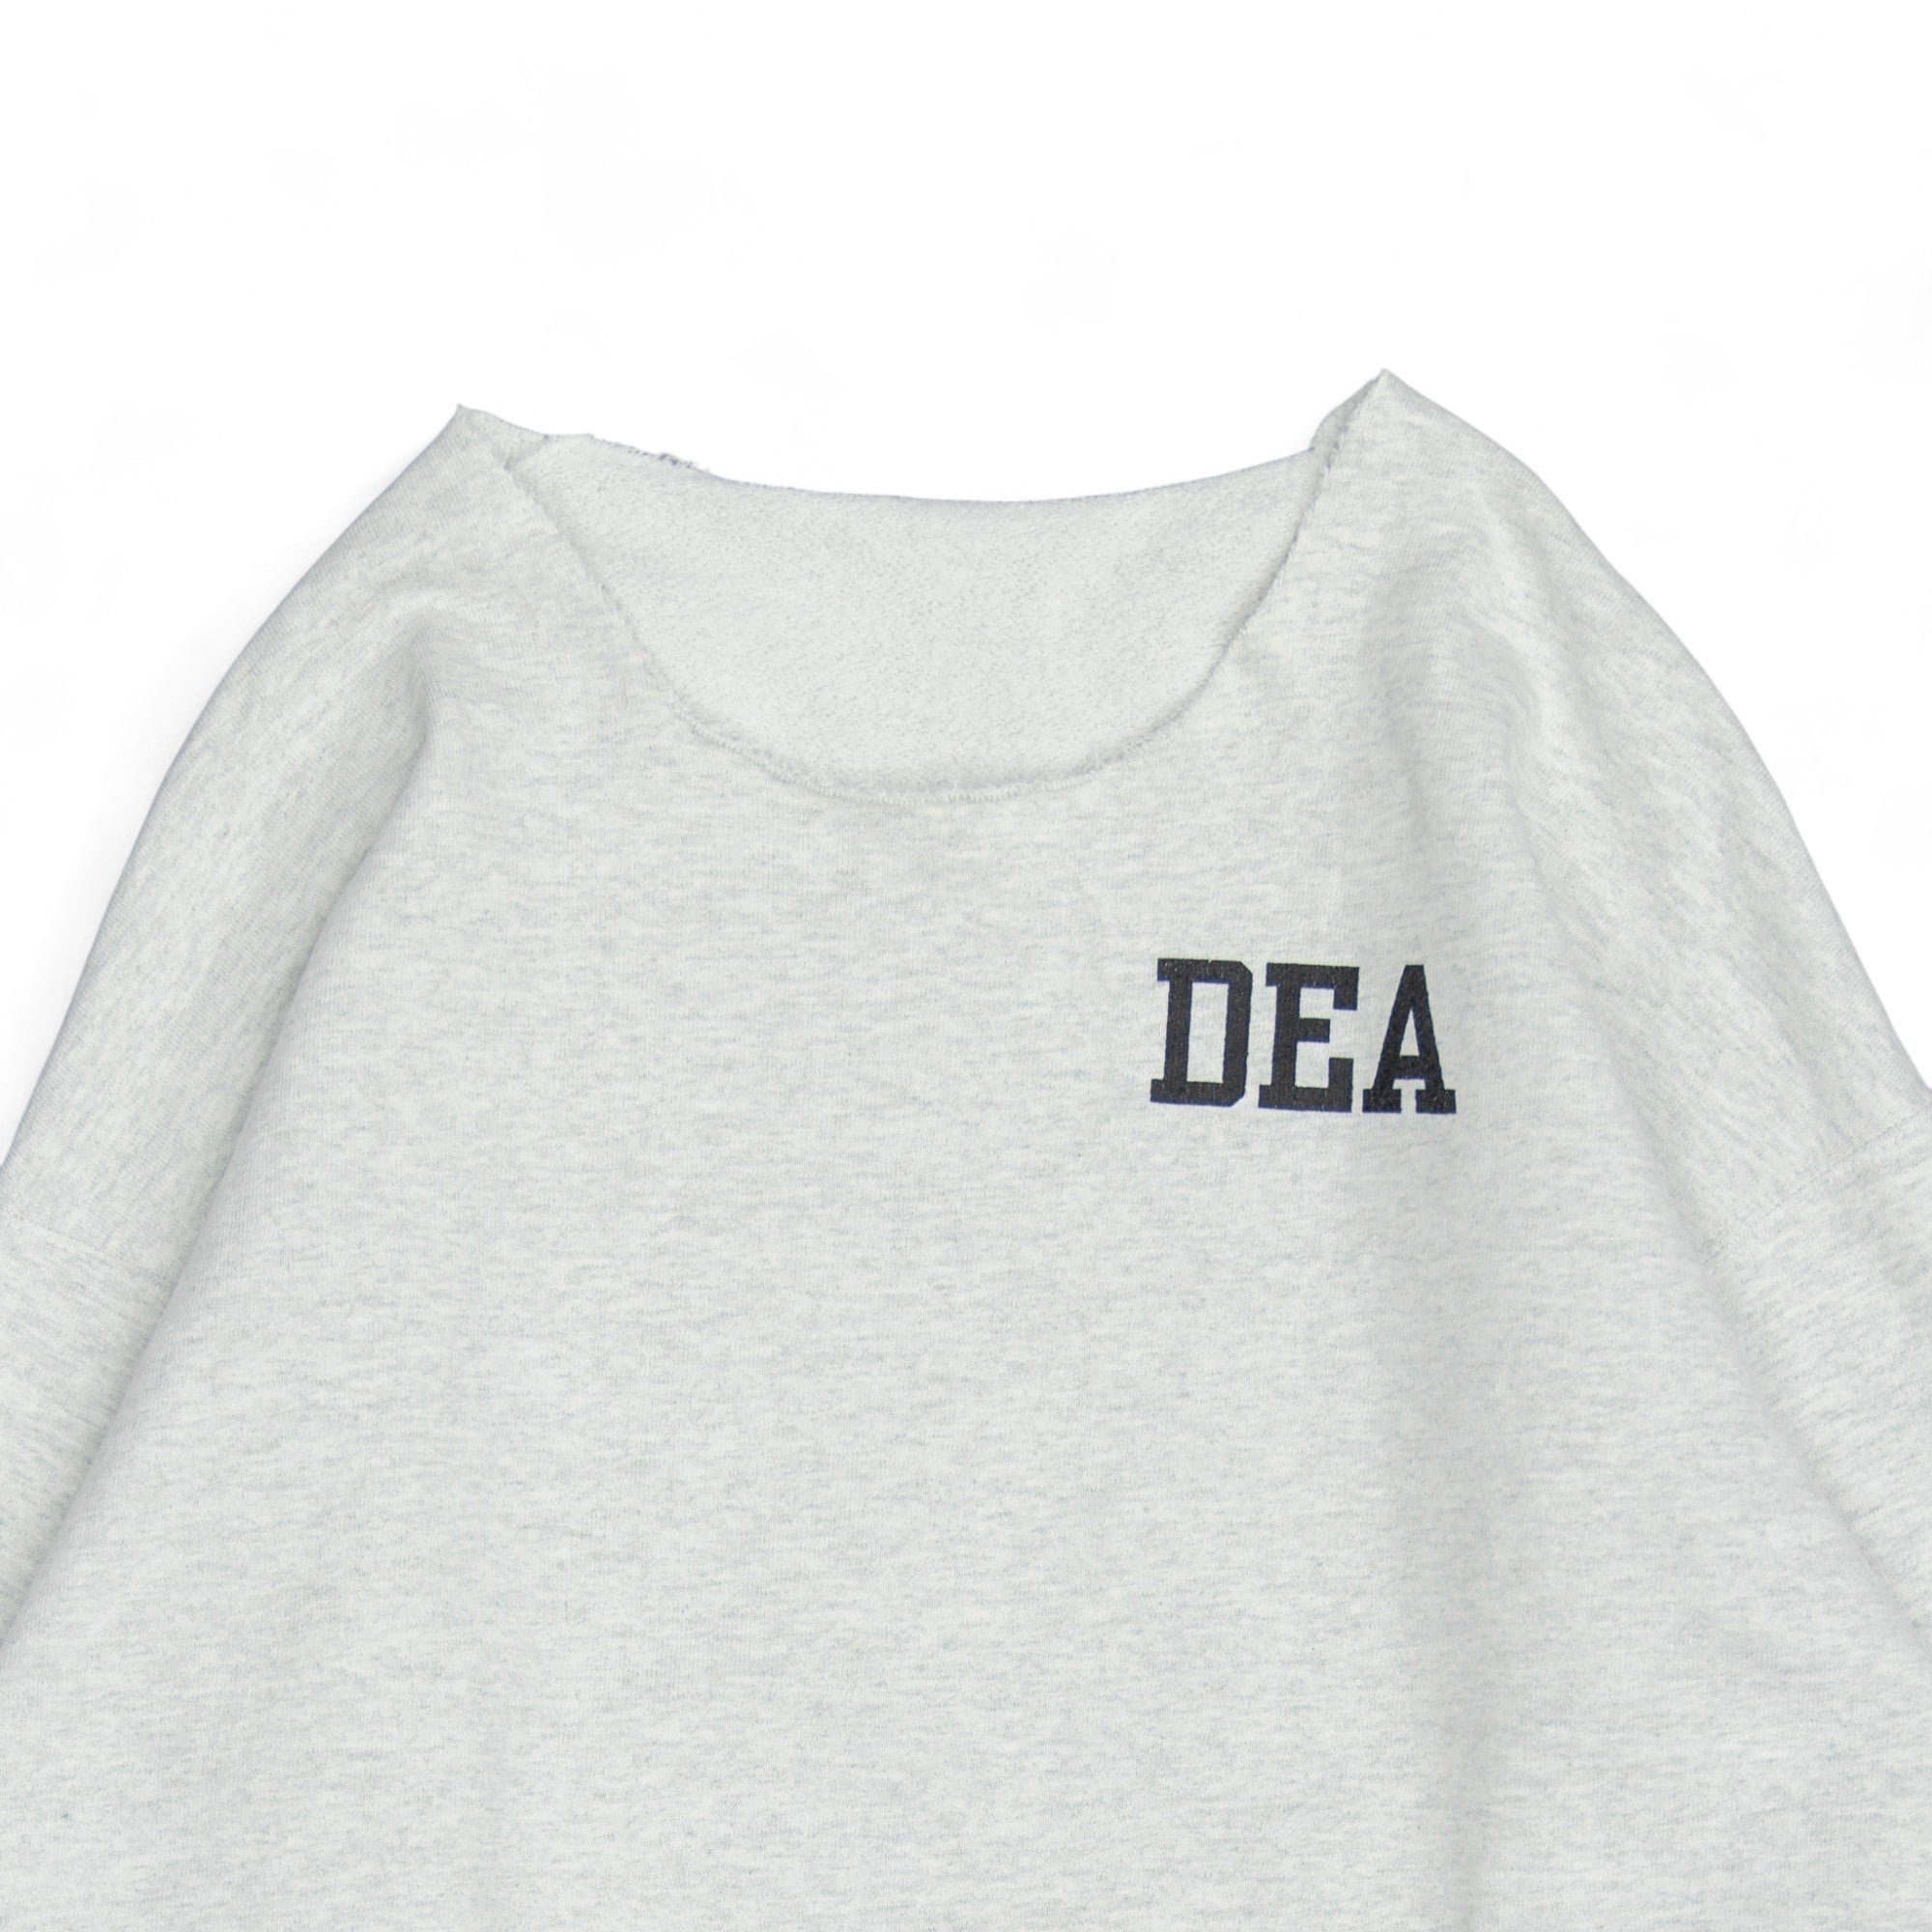 CROPPED DEA CREWNECK - 1990/EARLY 2000'S